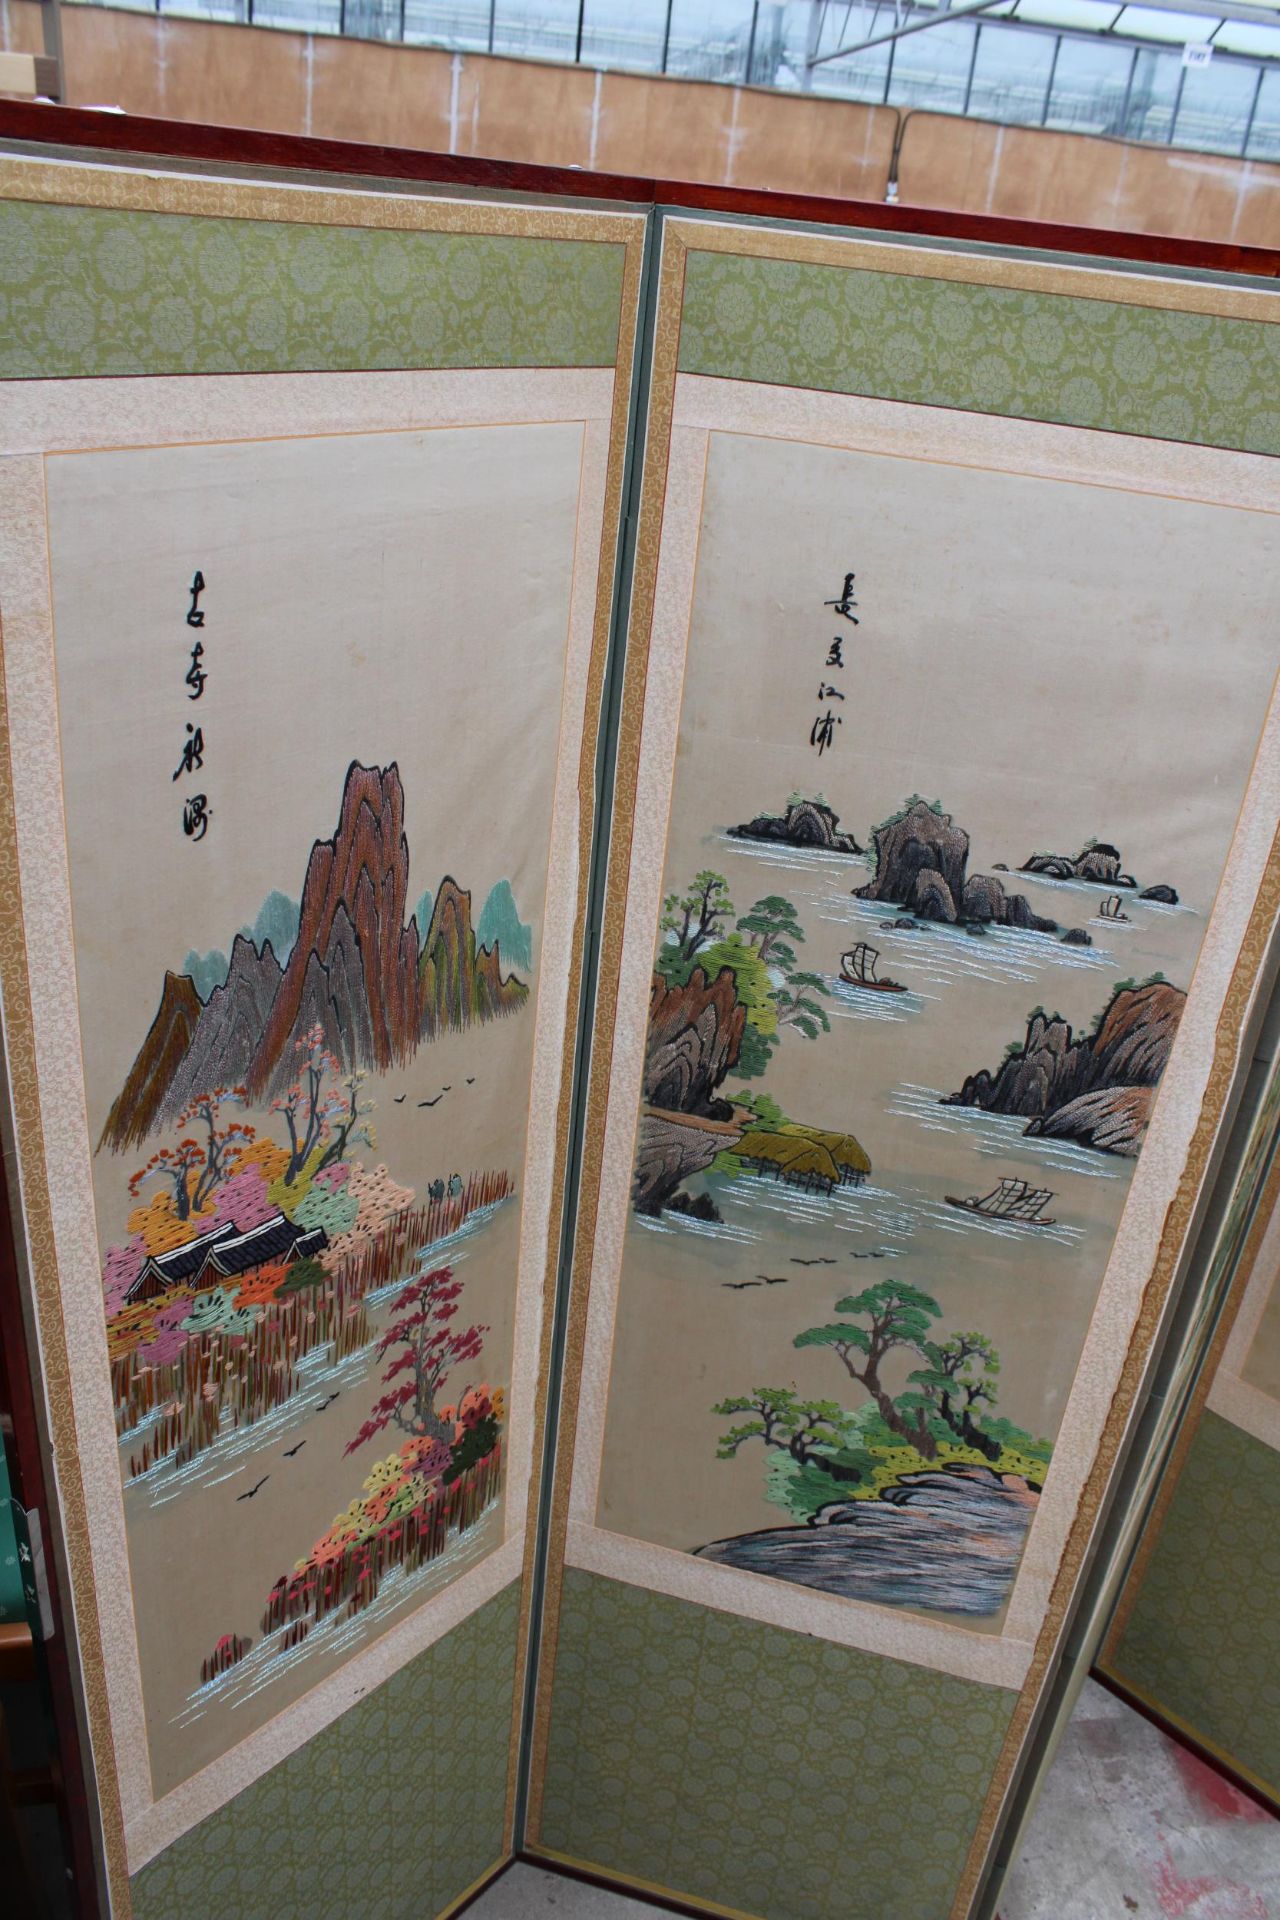 AN ORIENTAL SIX DIVISION SCREEN WITH TAPESTRY AND SILK MOUNTAIN SCENES EACH SECTION IS 60" X 18" - Image 2 of 7